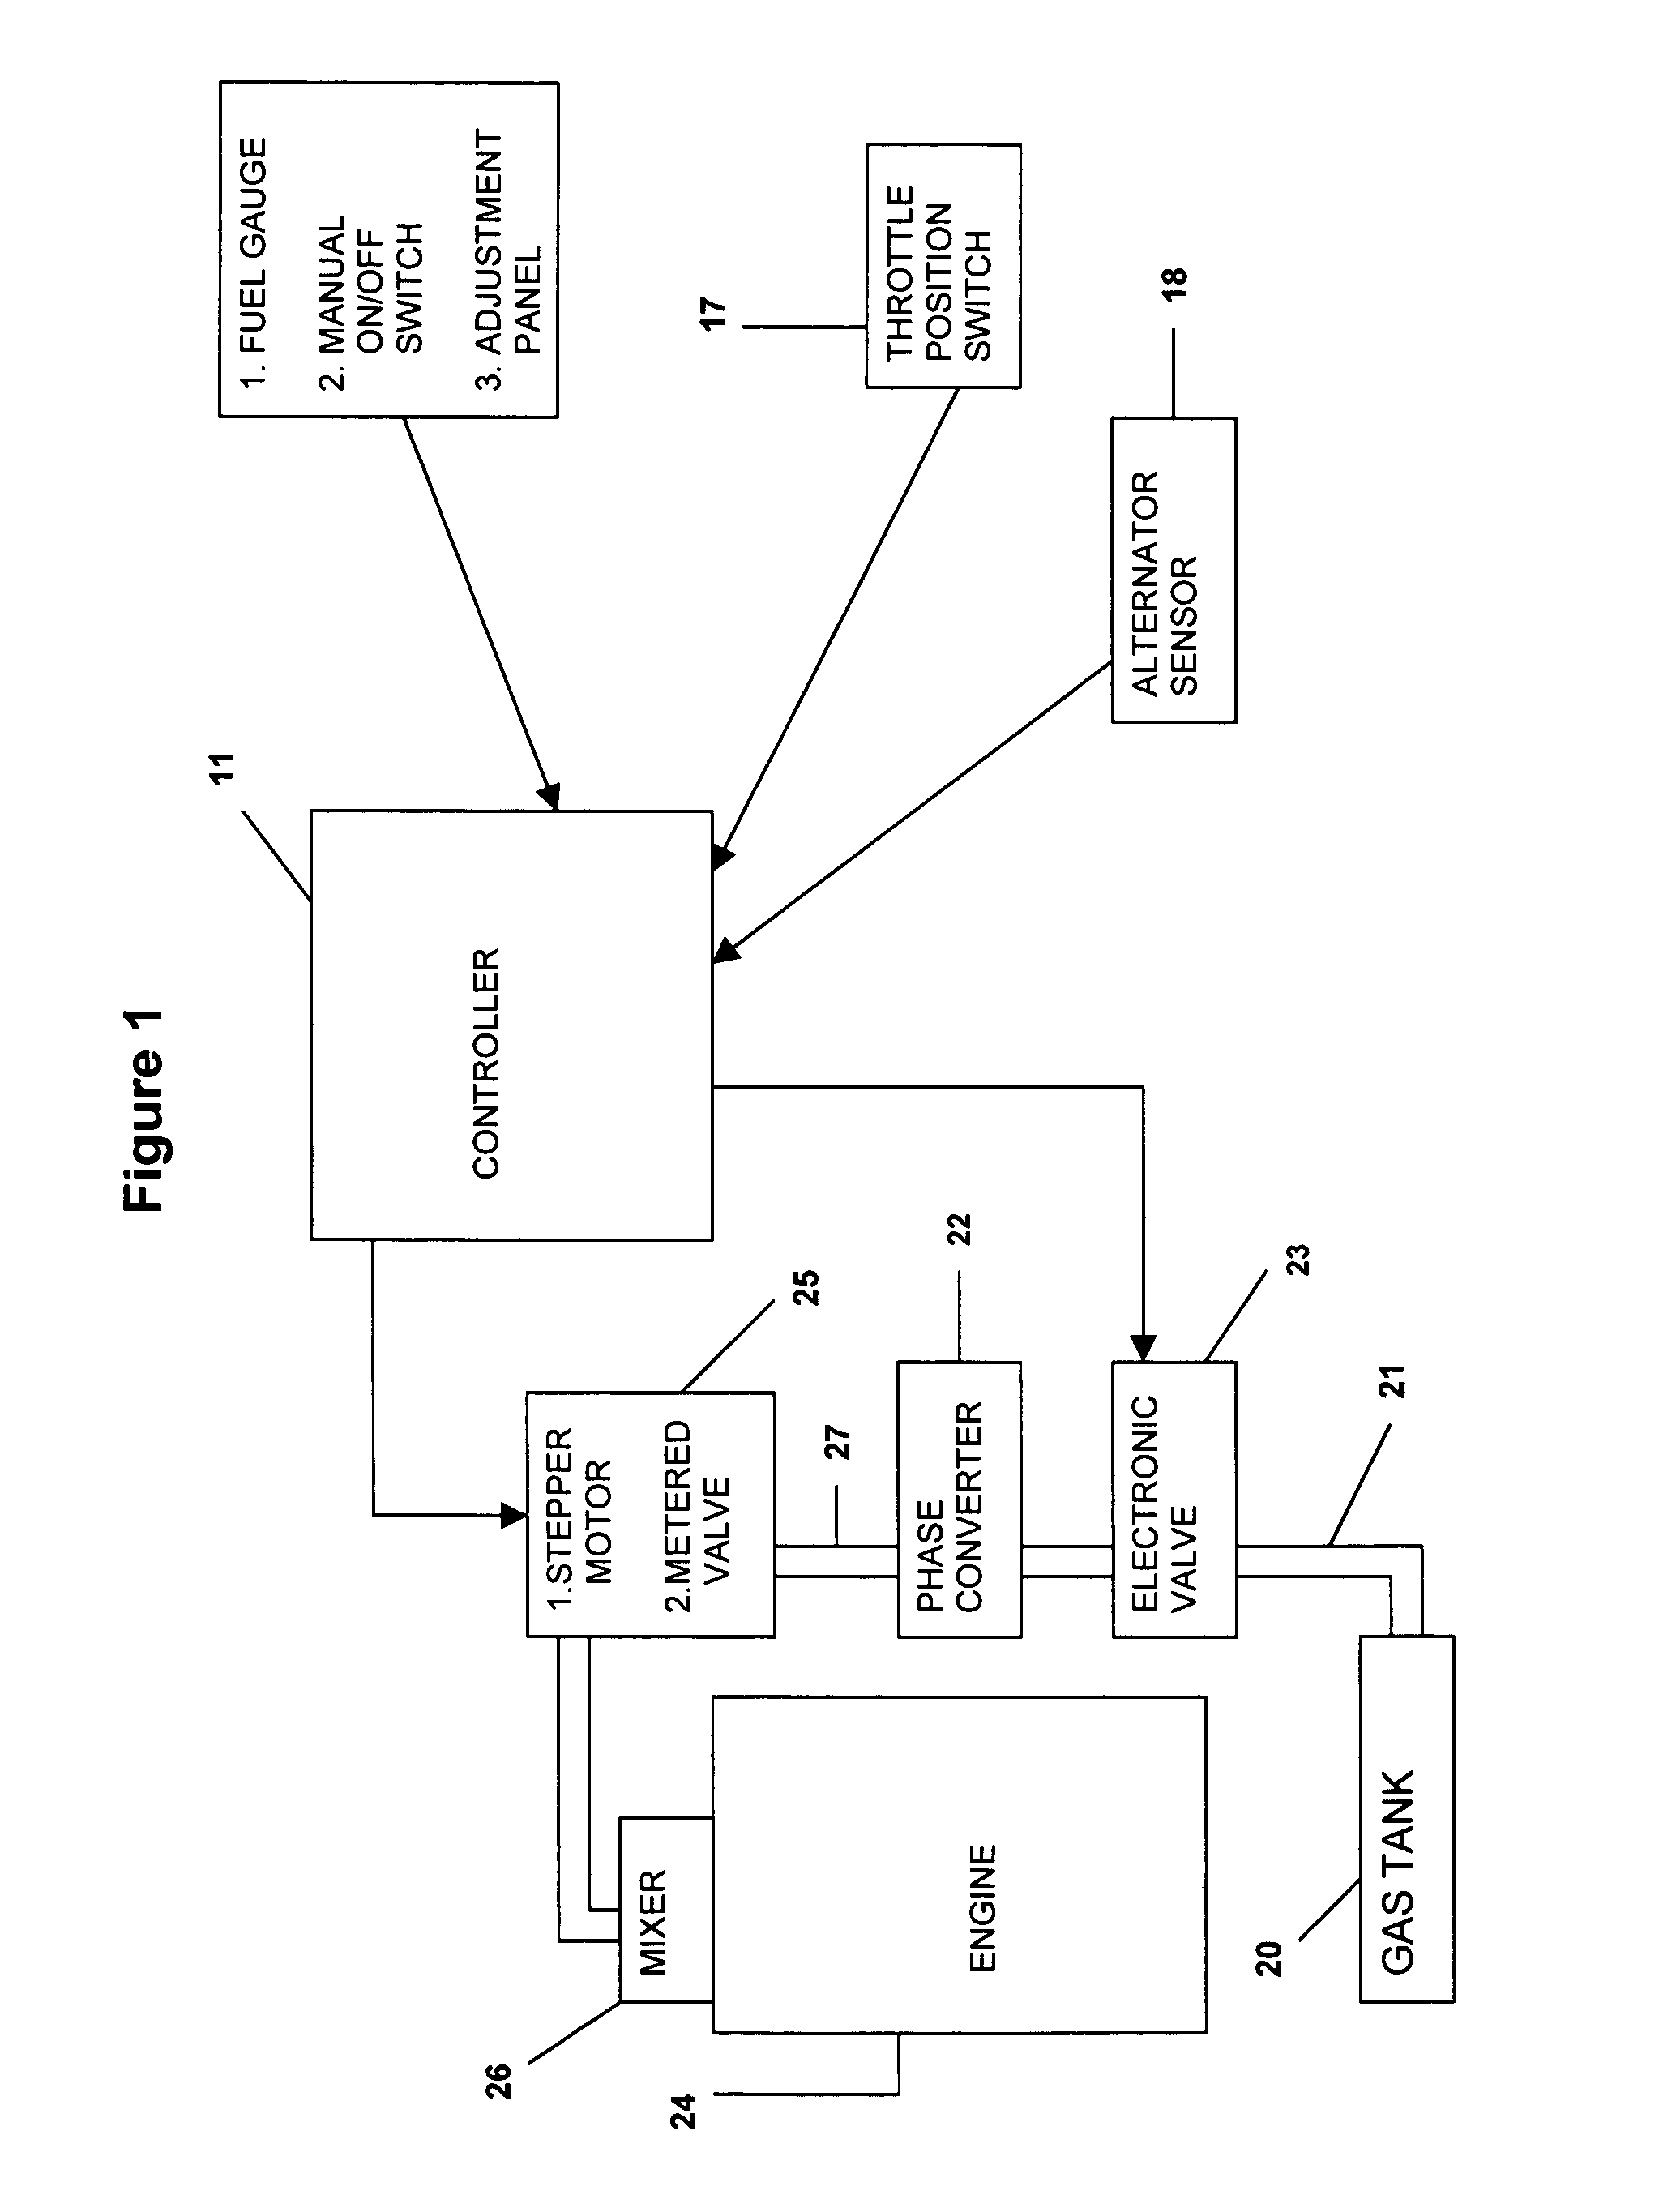 Fuel control system for a dual fuel internal combustion engine